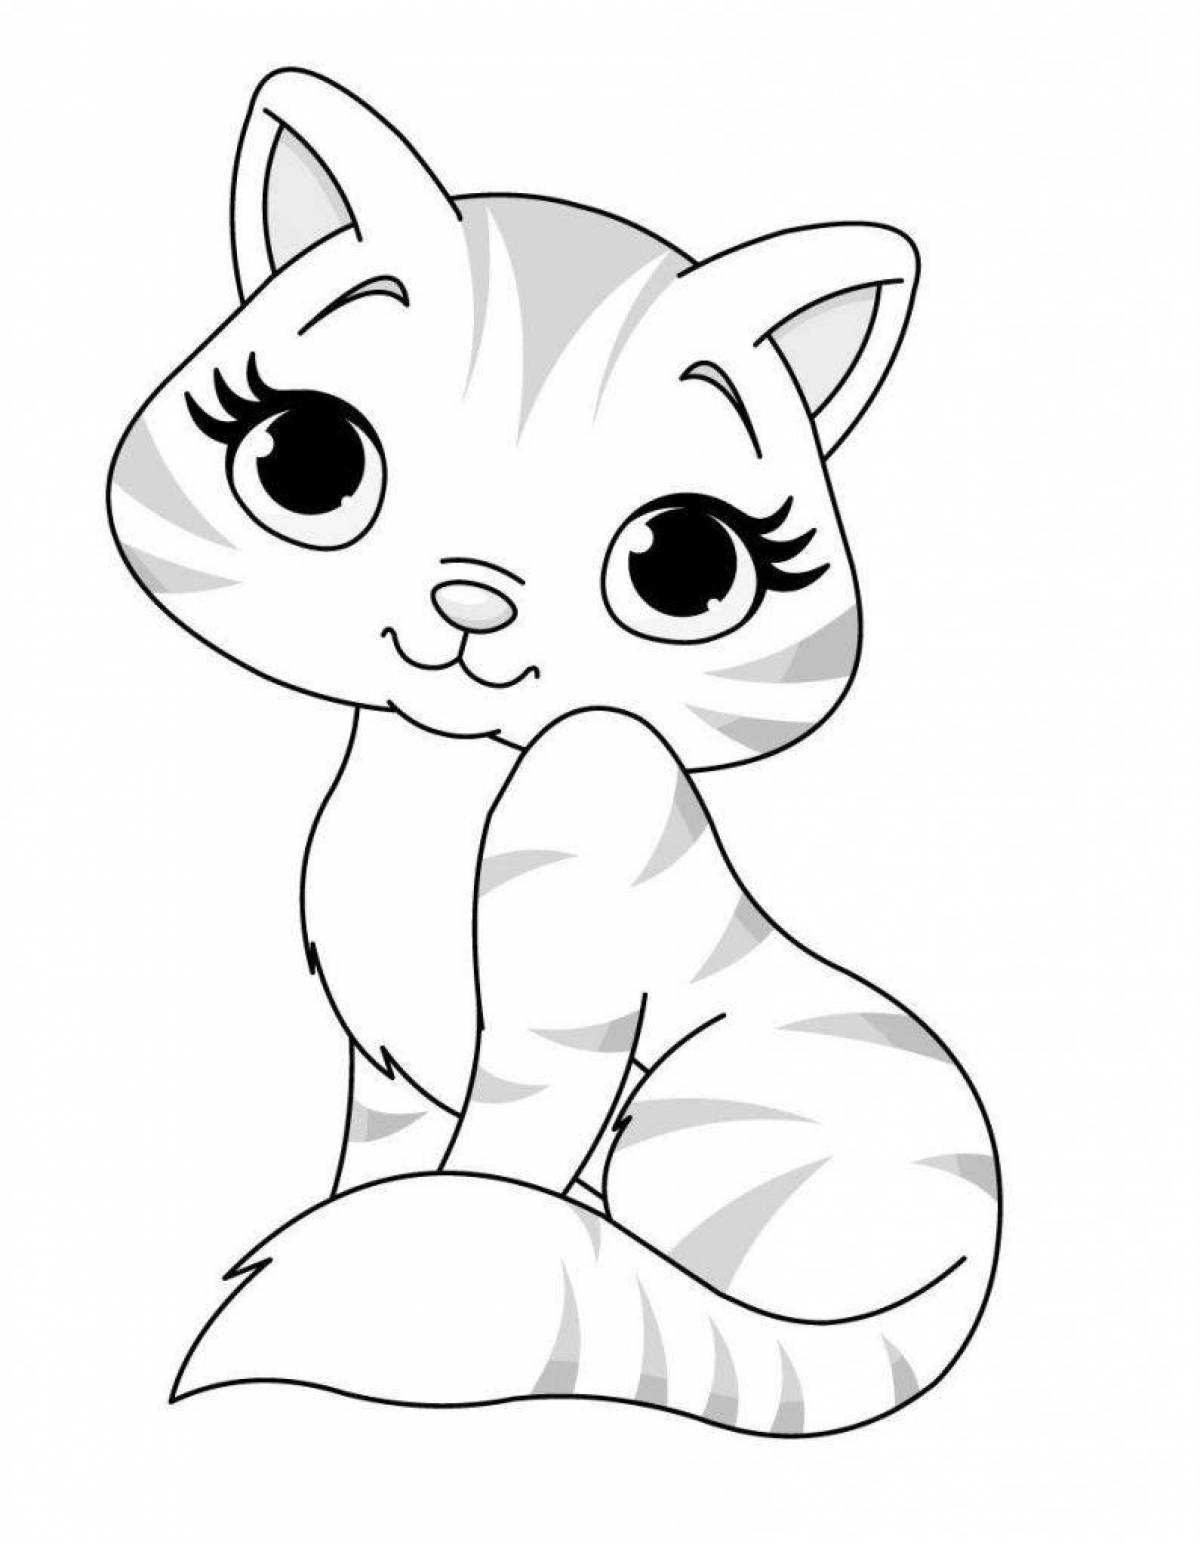 Snuggly little kittens coloring page